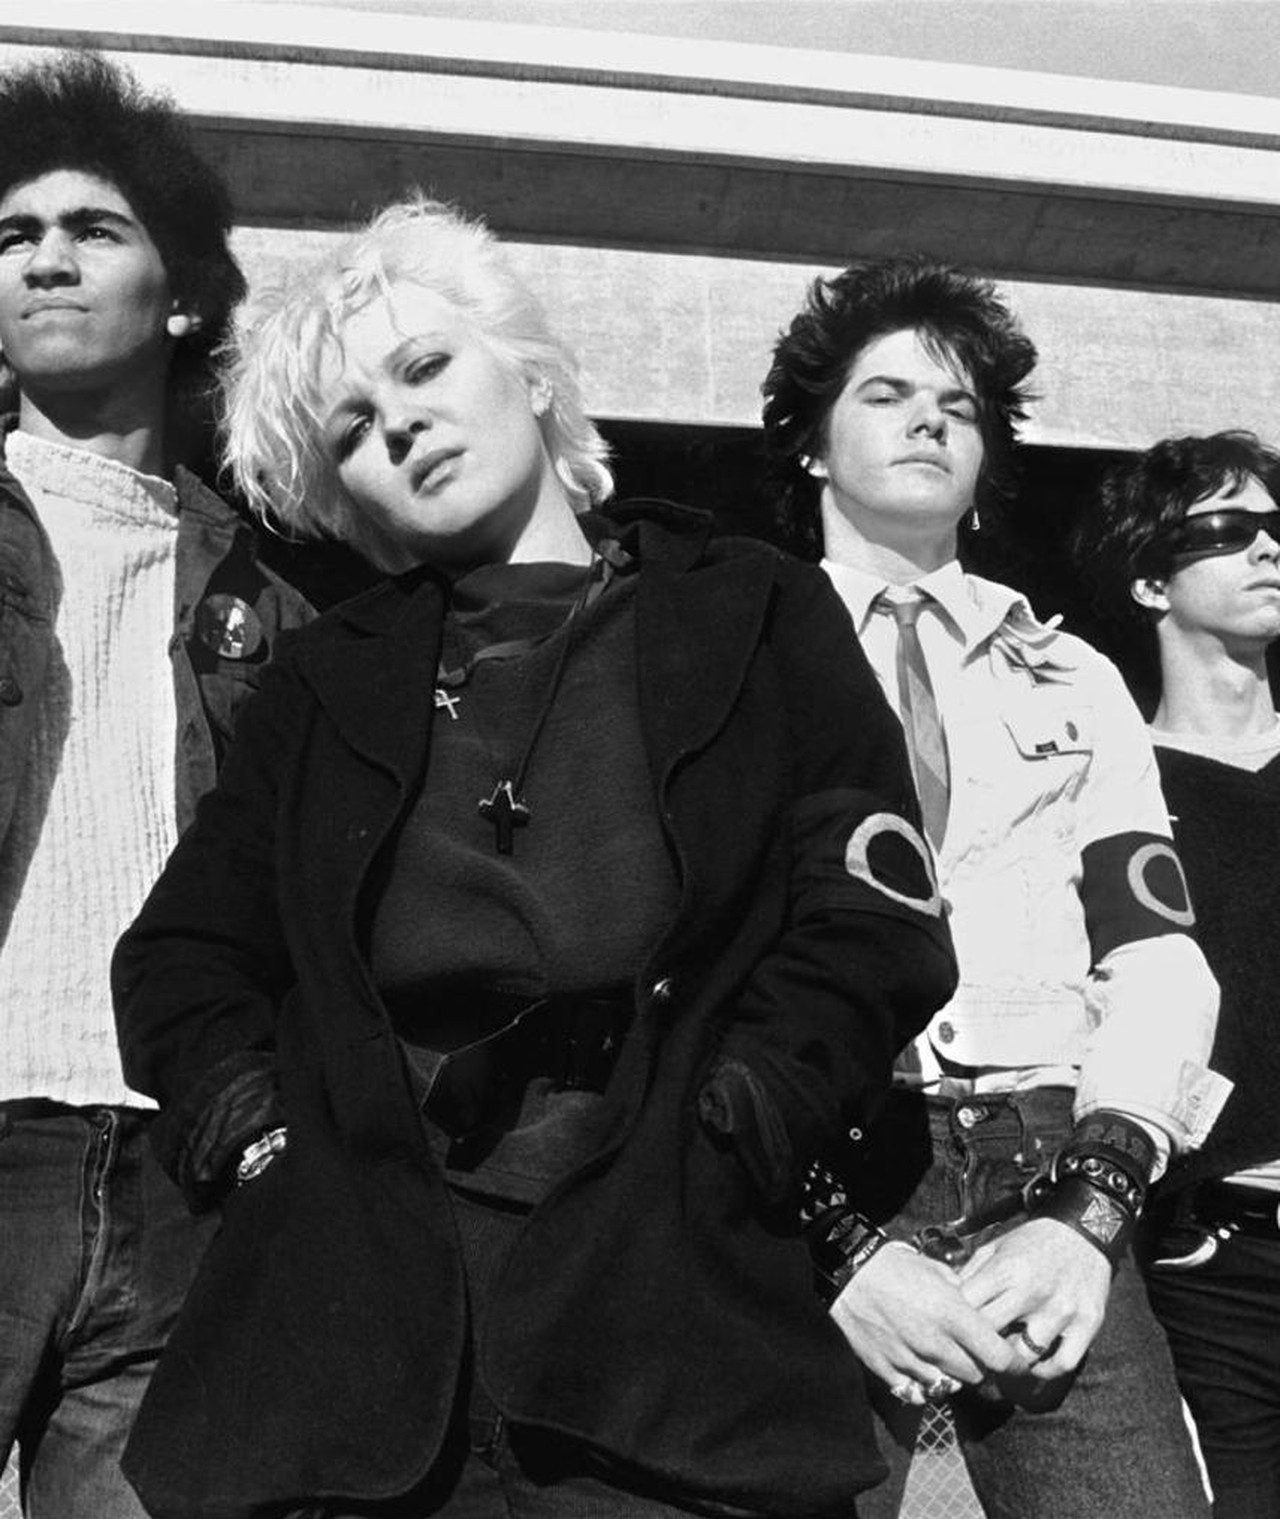 Photo of The Germs